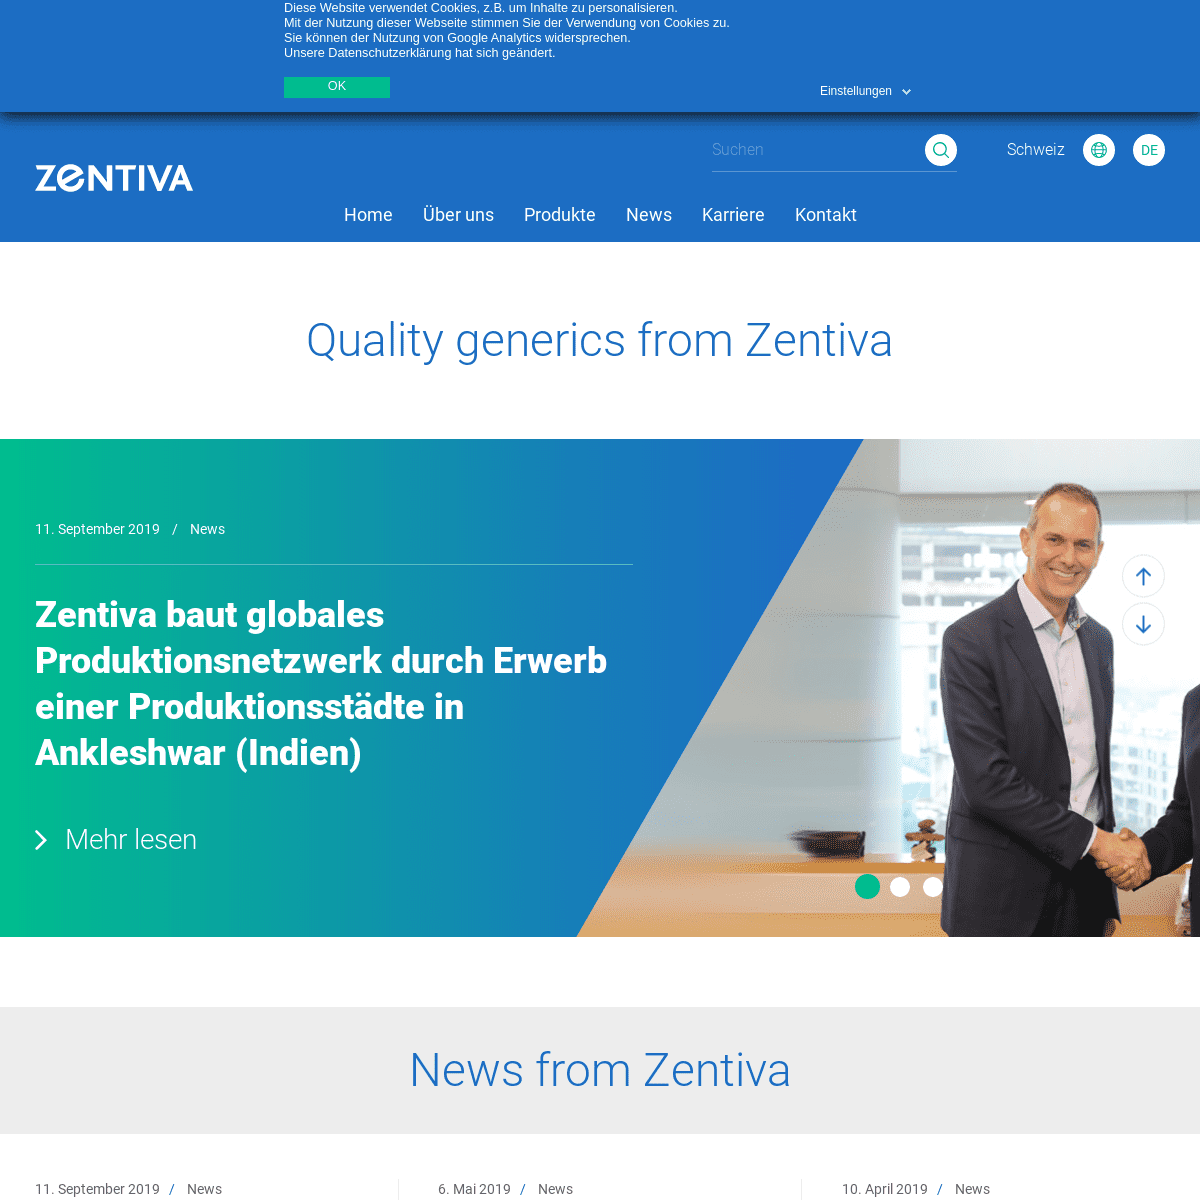 A complete backup of zentiva.ch